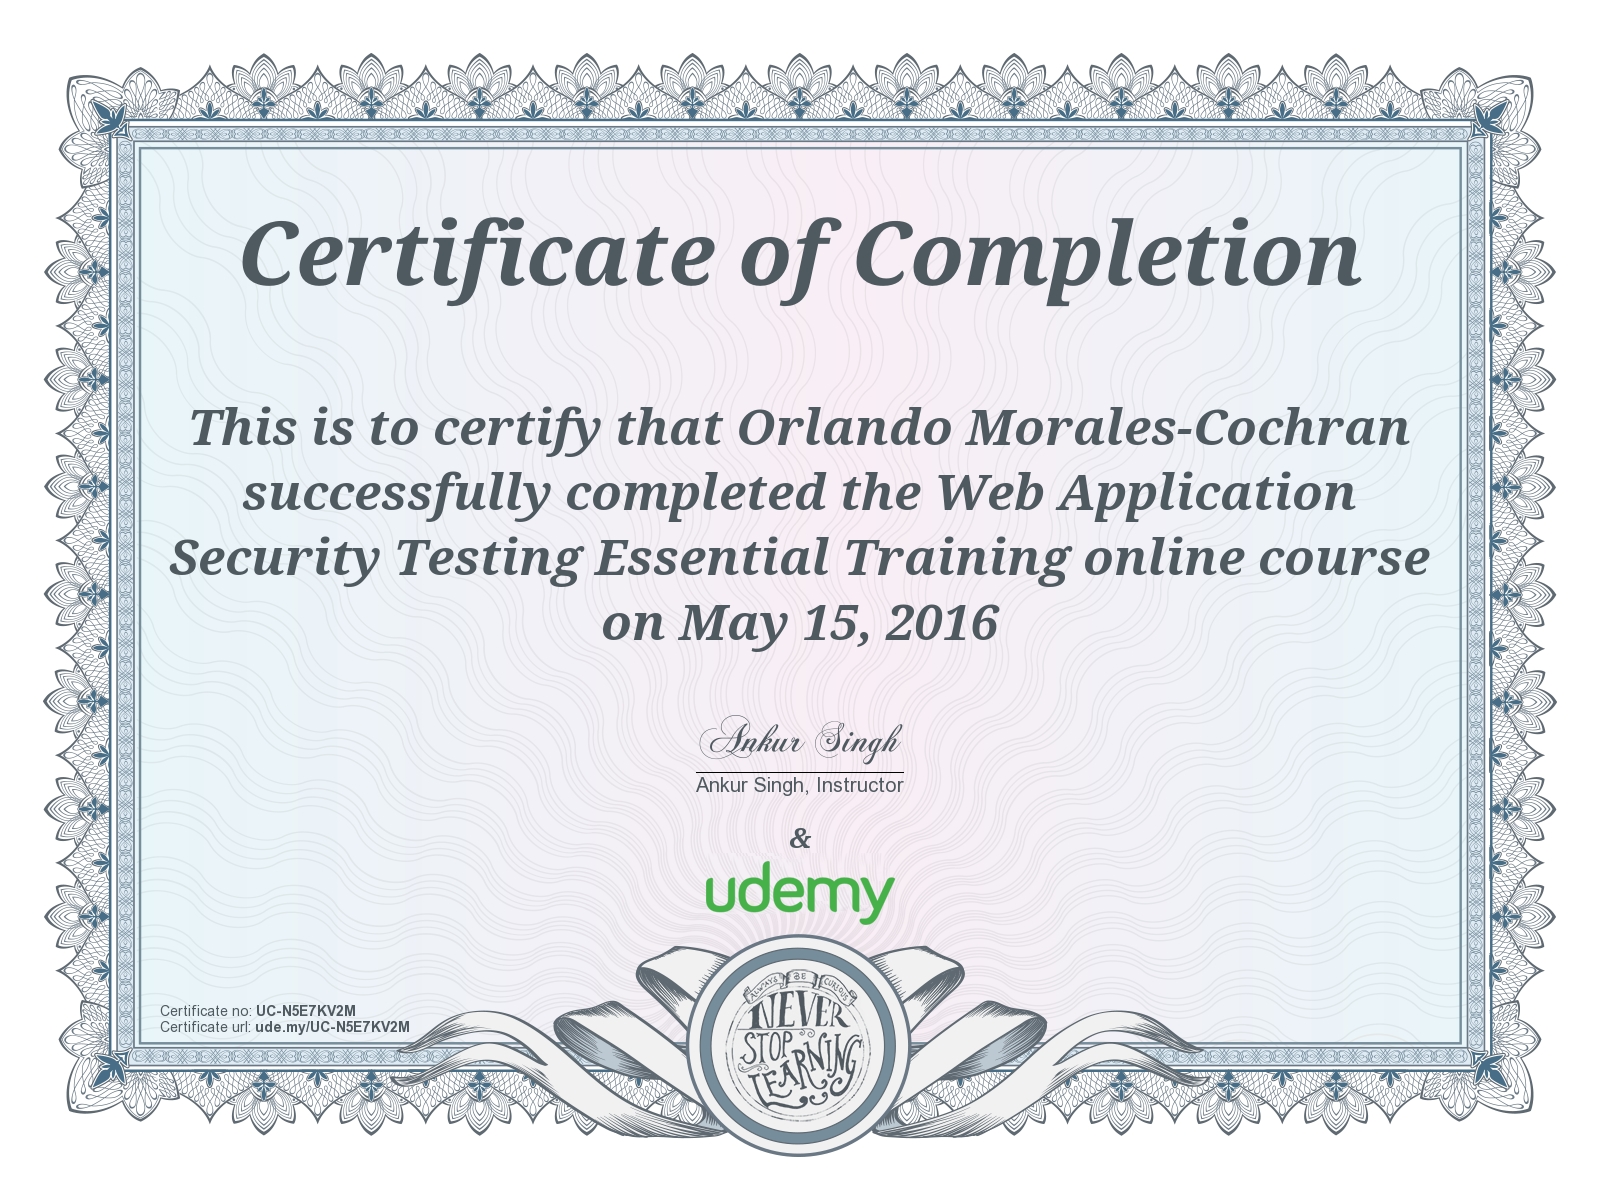 Udemy - Web Application Security Essentials Certificate of Course Completion